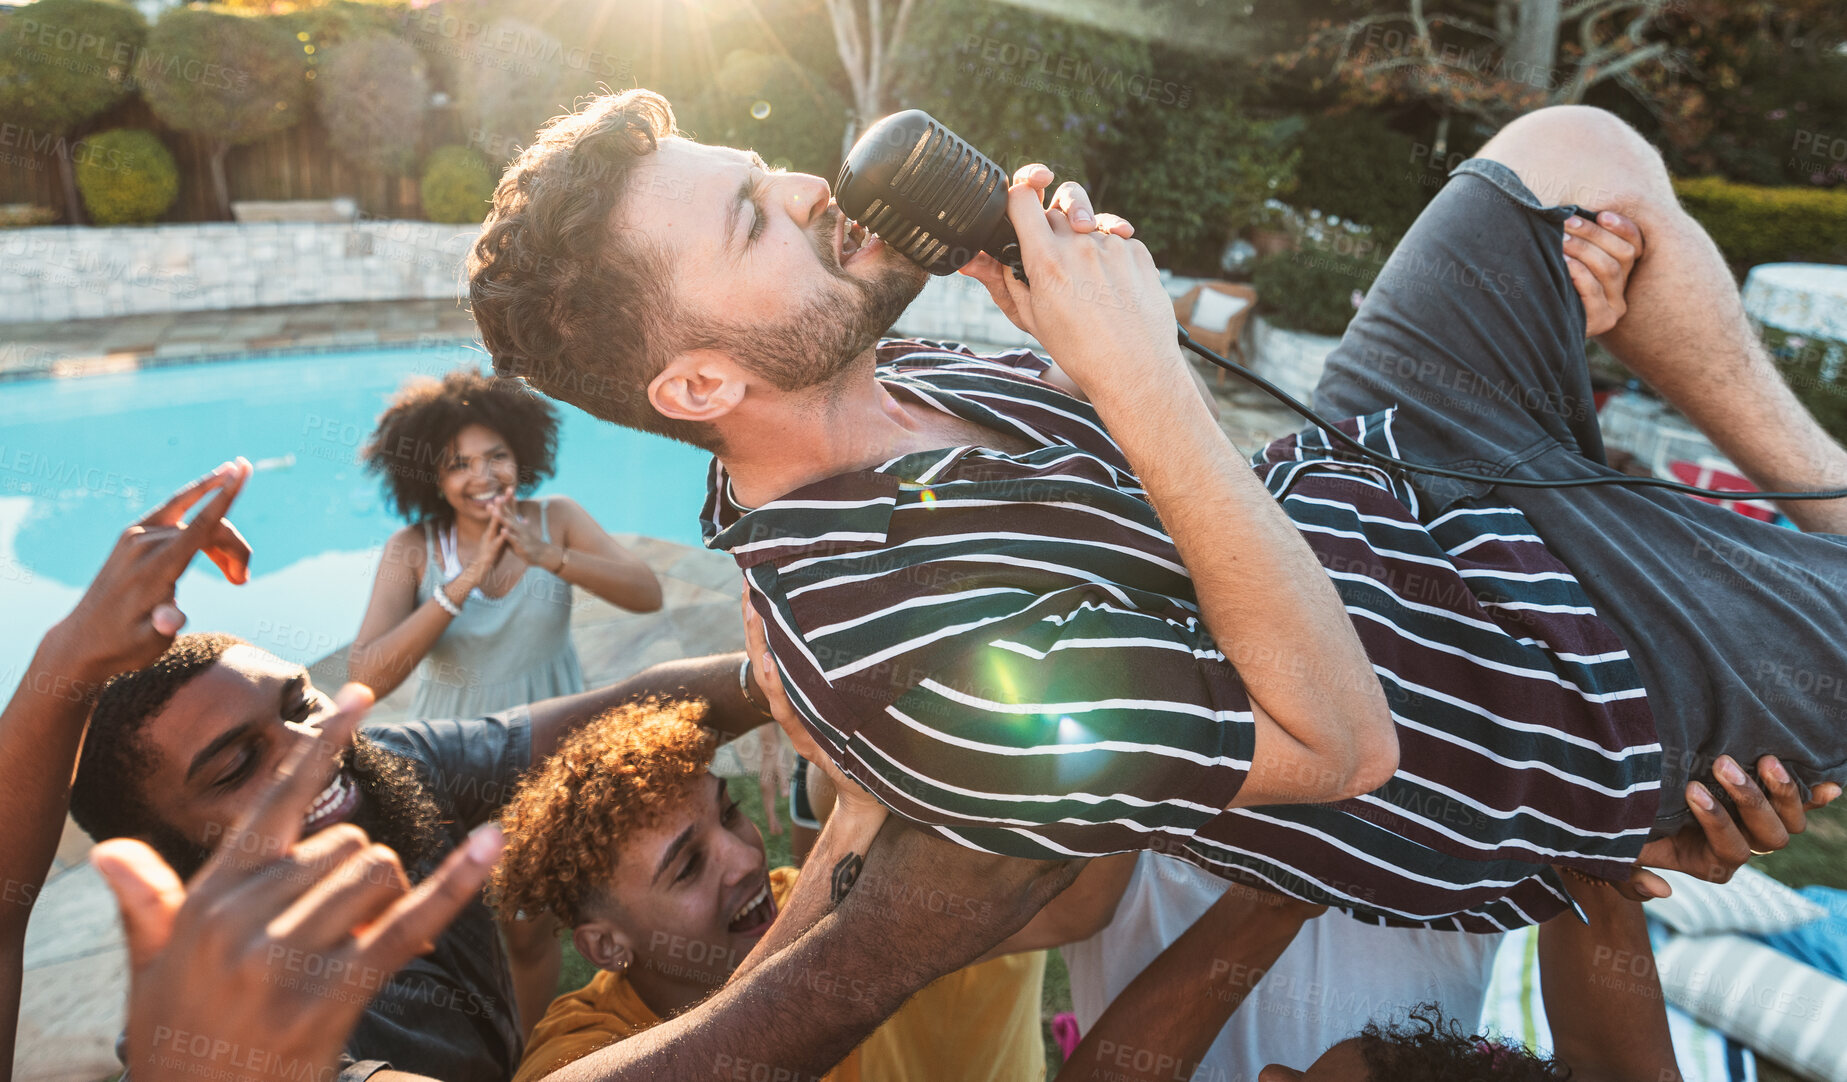 Buy stock photo Microphone, singing and crowd surfing with a man performer at a party outdoor during summer. Concert, energy and audience with a male singer being carried by a group of people at a performance event